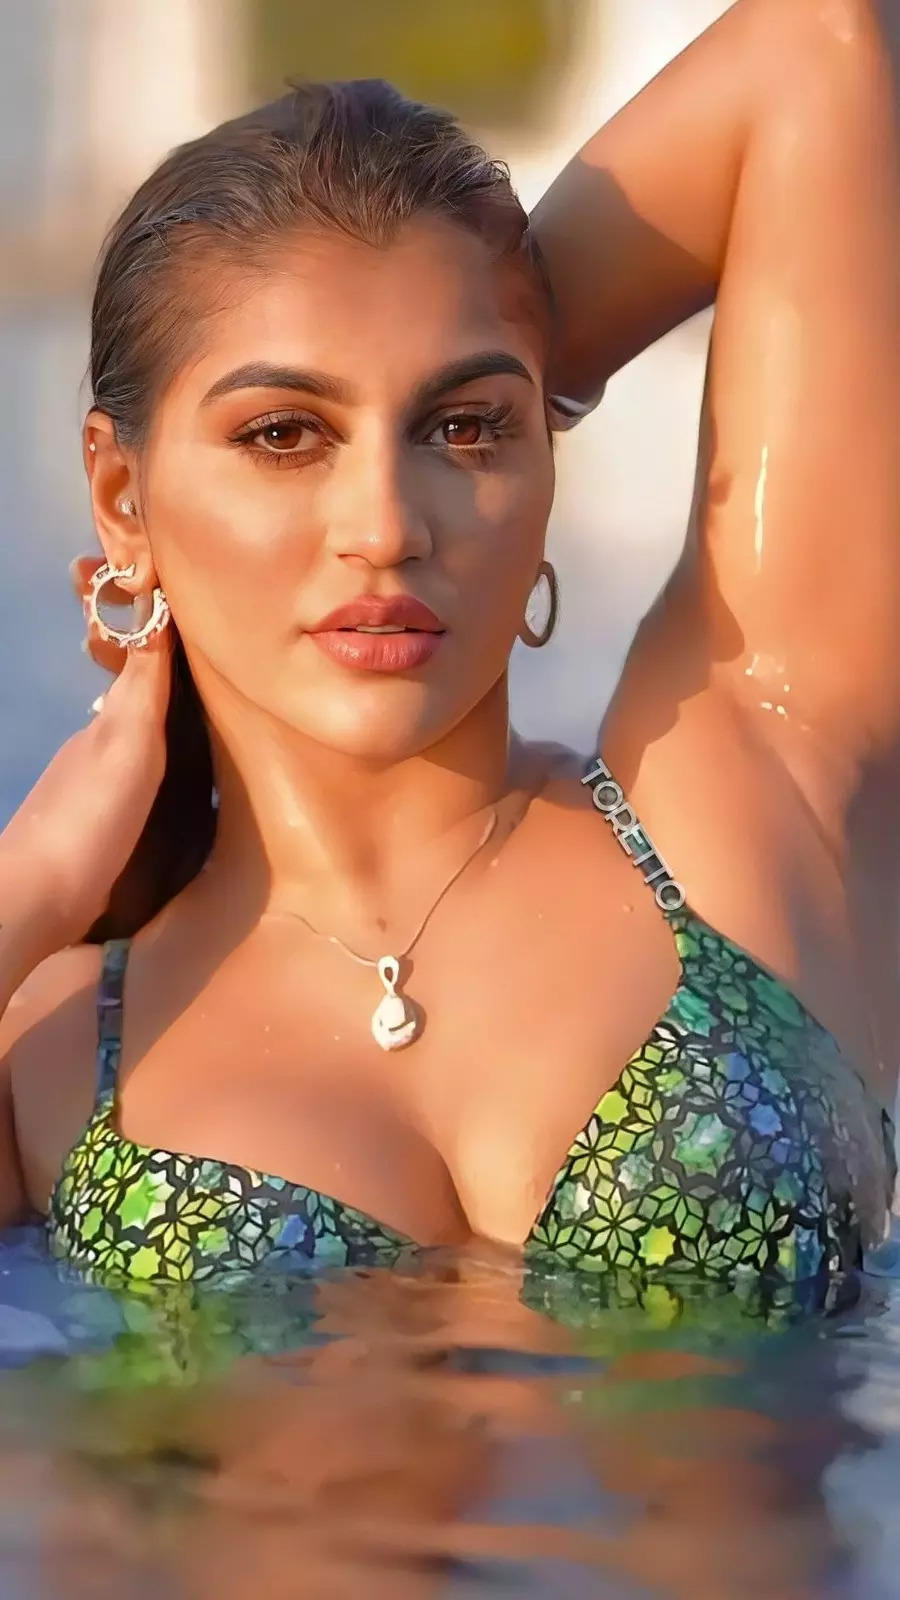 Yashika Anand's cool pictures set the internet on fire | Times of India